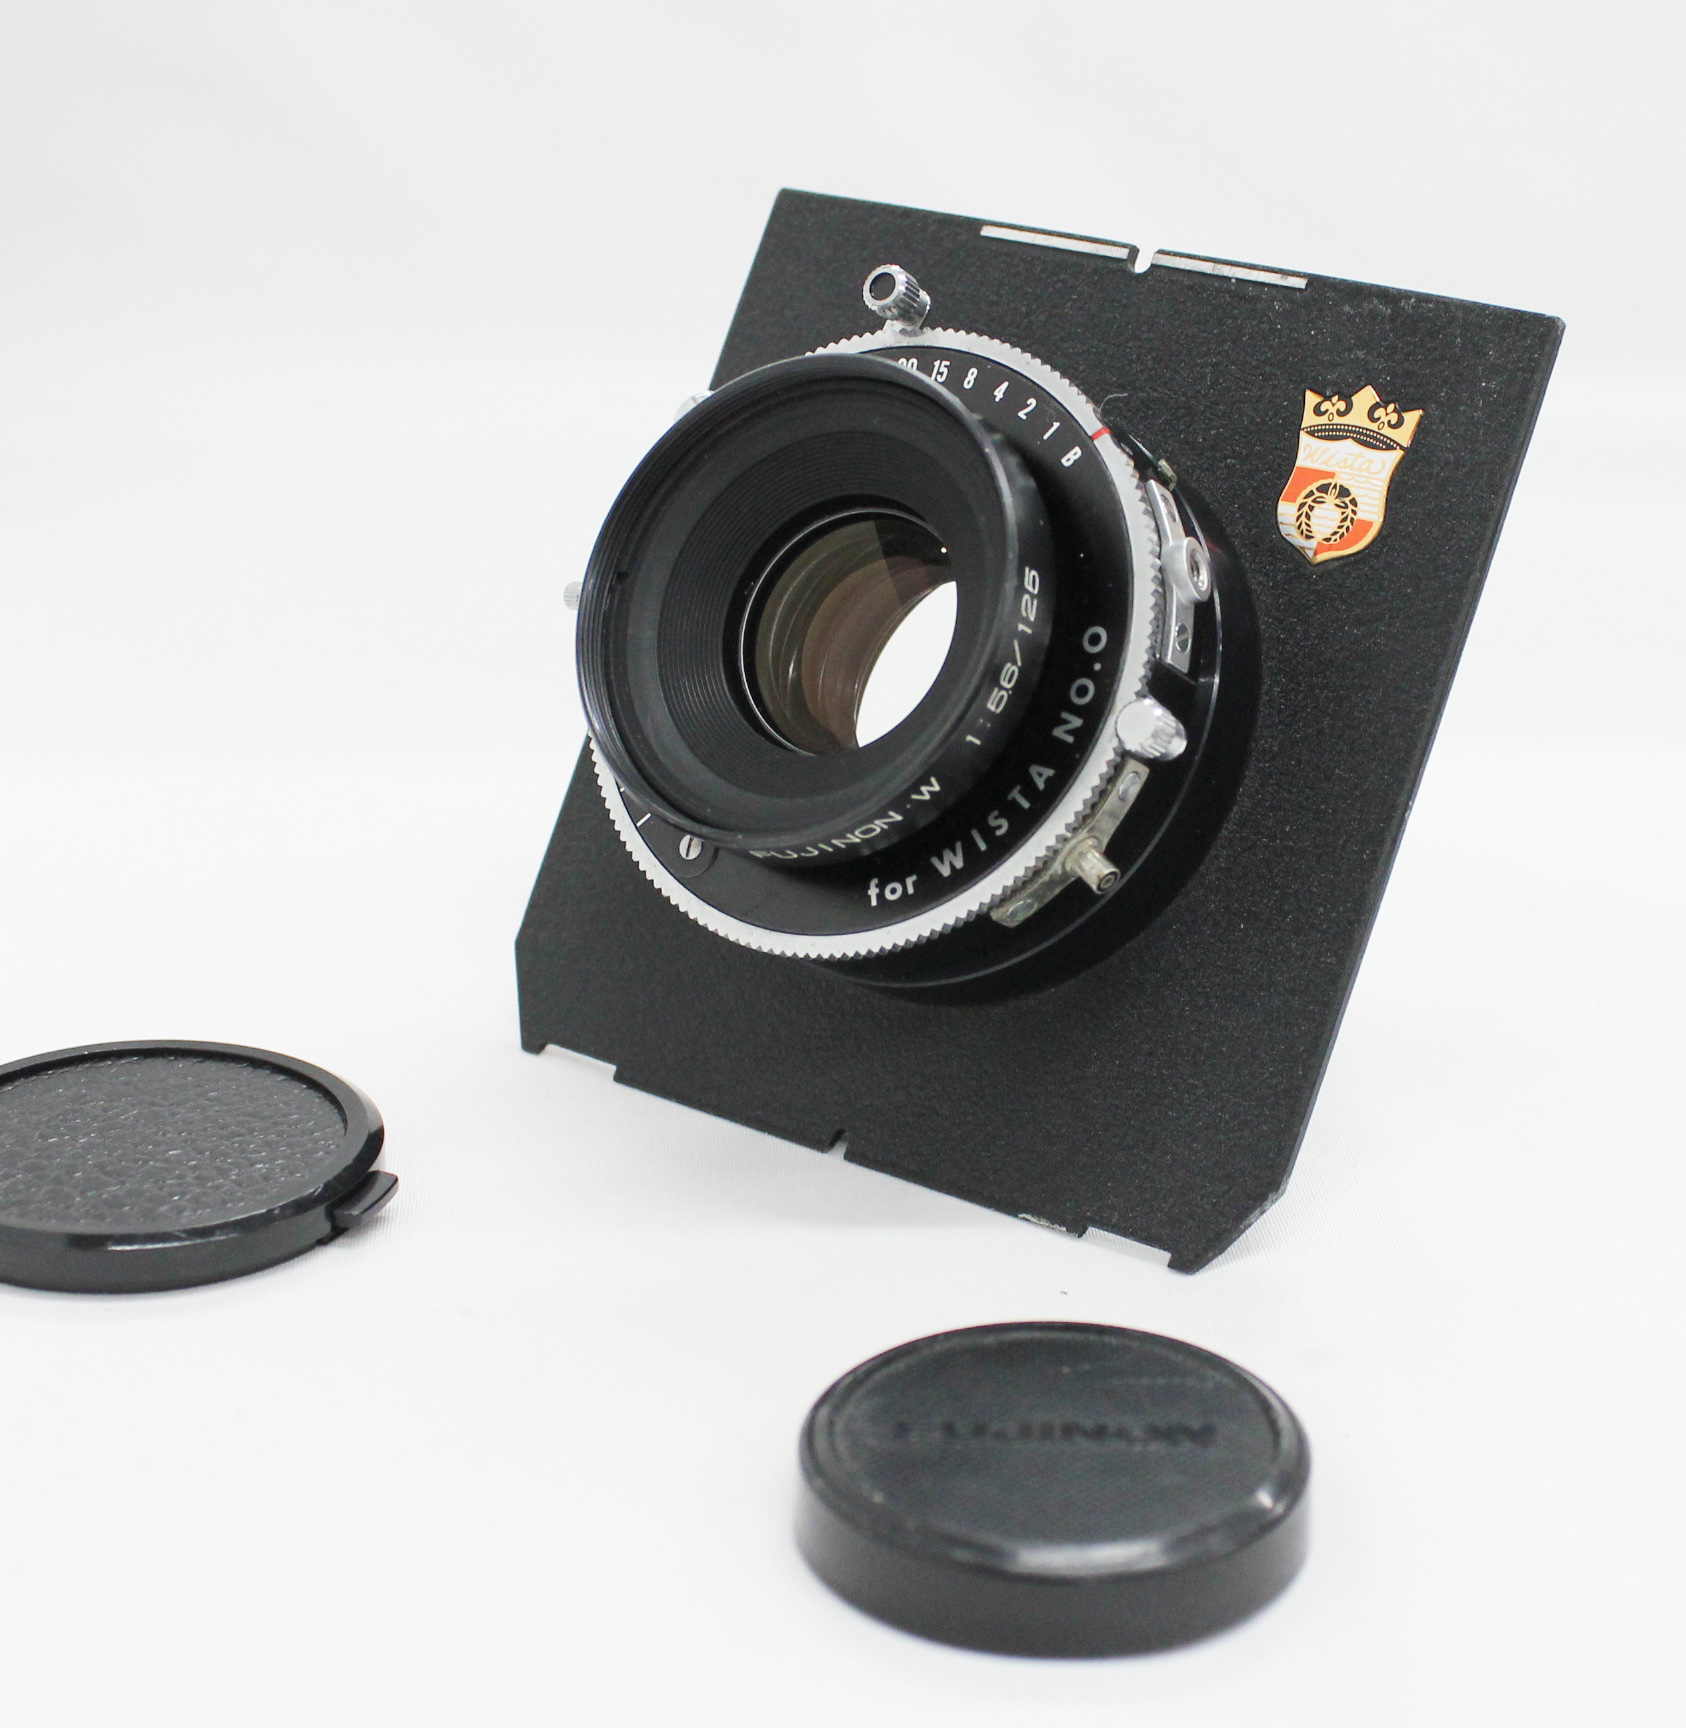 Japan Used Camera Shop | [Excellent+++++] Fujinon W 125mm F/5.6 4x5 Large Format Lens with Copal for wista No.0 Shutter from Japan